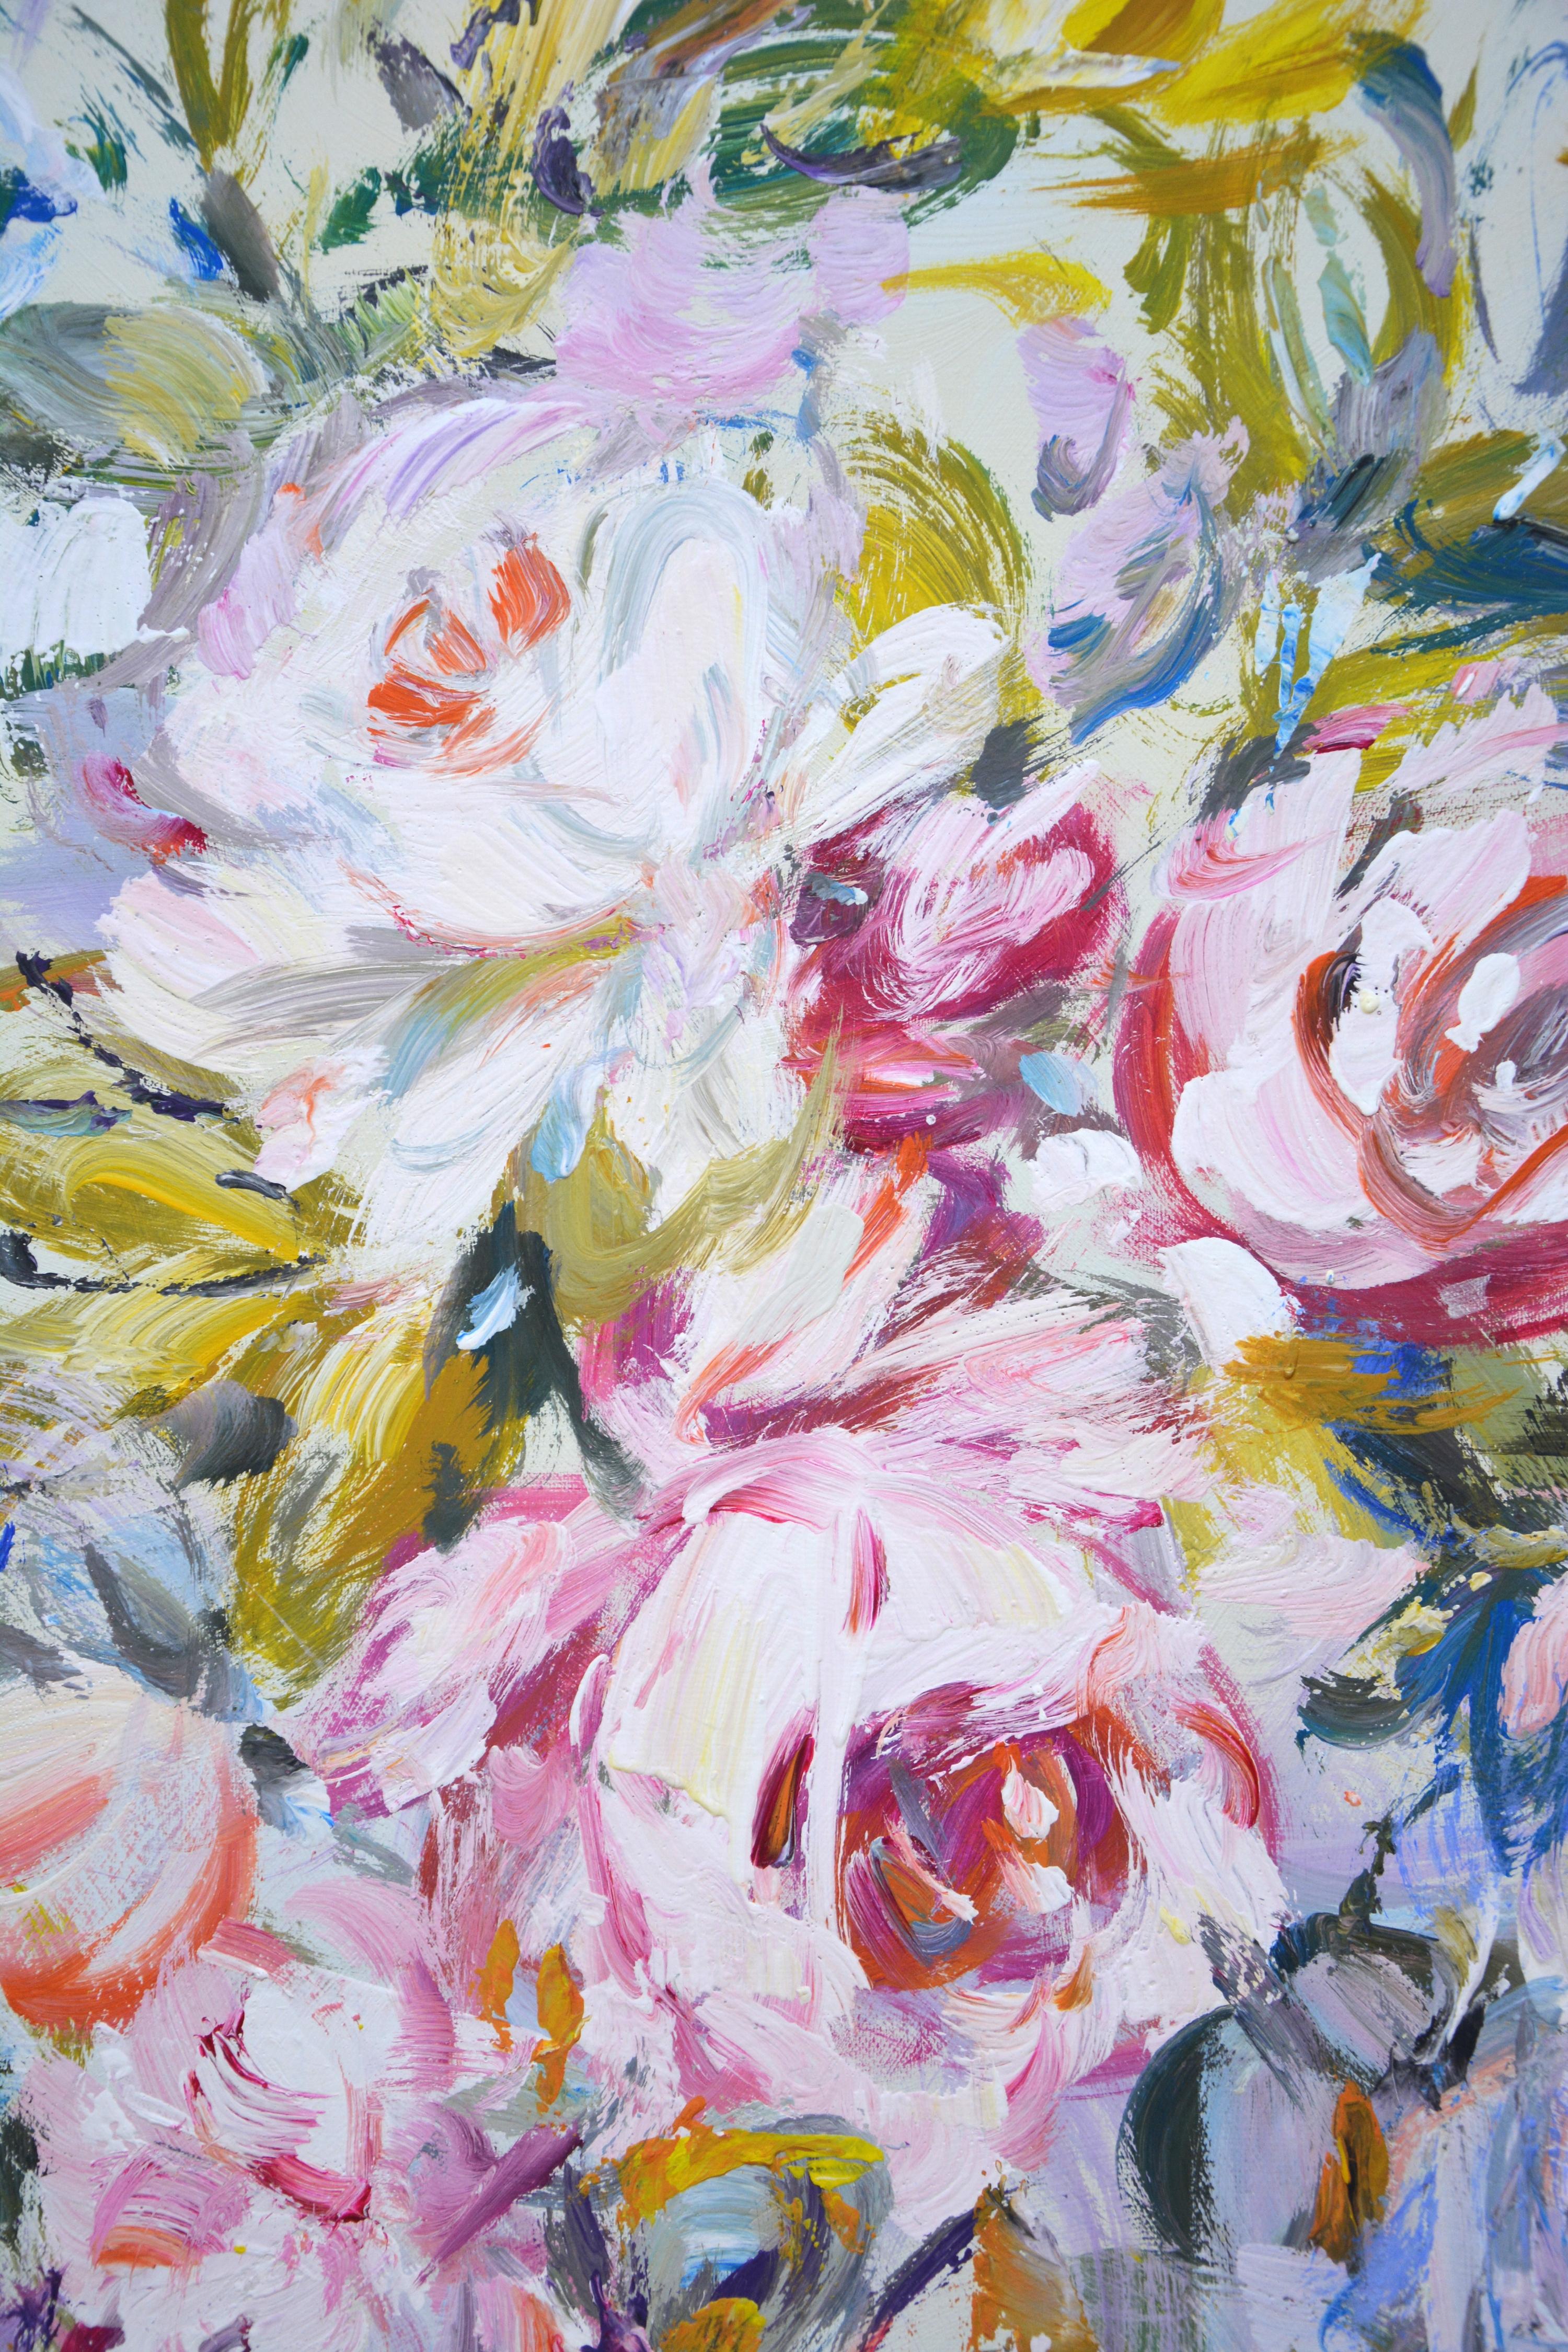 Roses. Delicate bouquet. Floral still life: pink and white flowers on an abstract white background, created with brushes and a spatula. The picture is filled with positive, solar energy, tenderness. Part of a permanent series of floral arrangements.